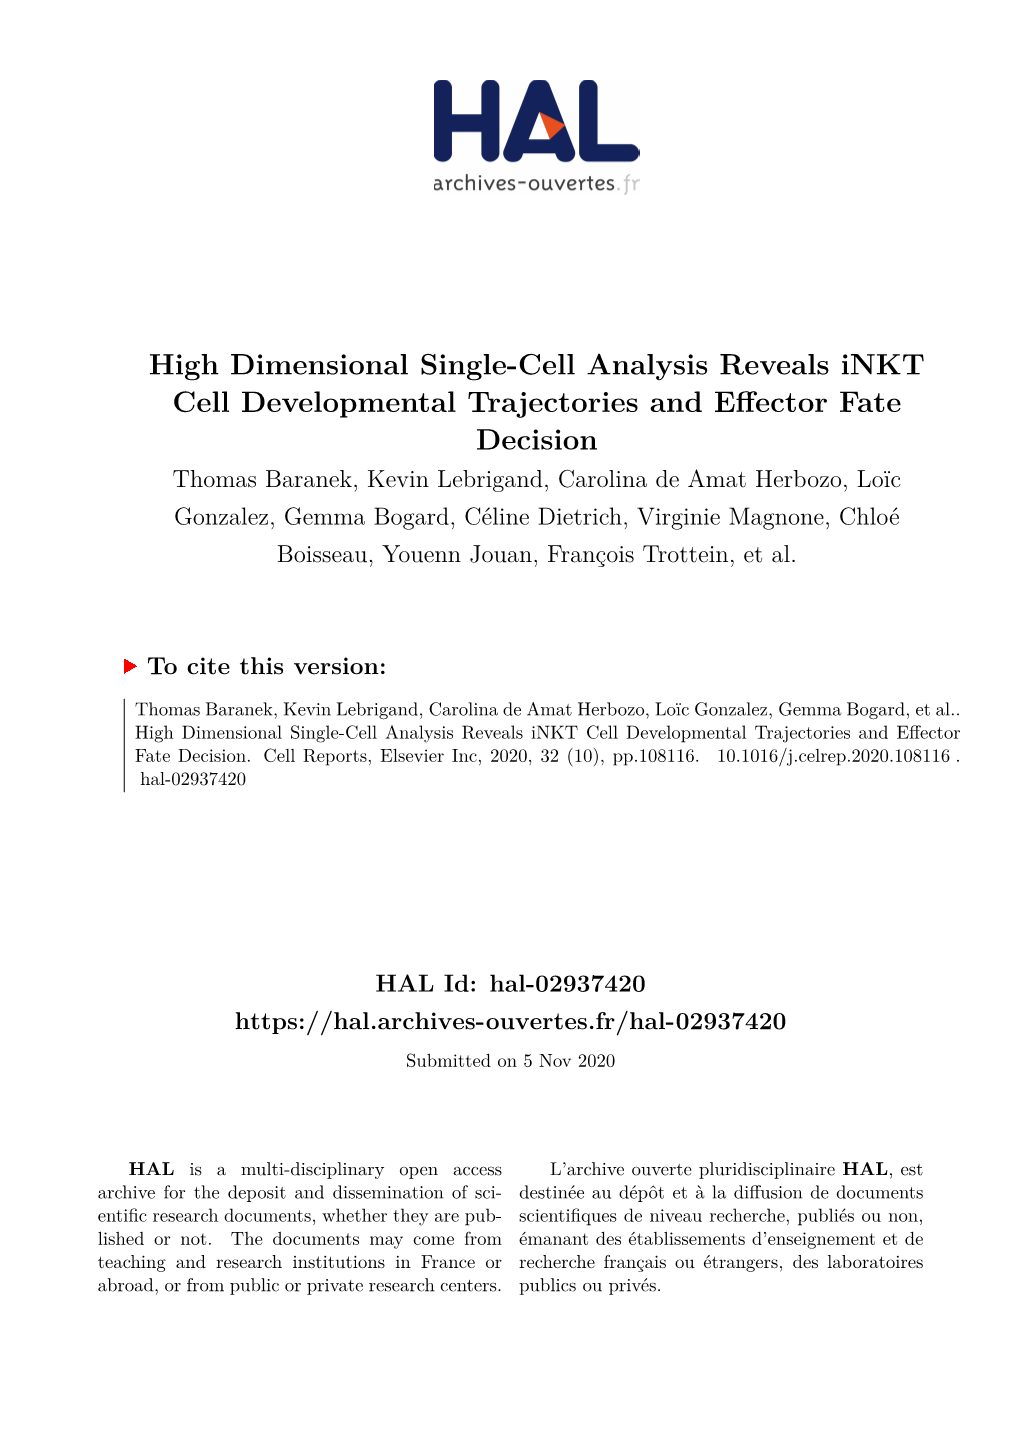 High Dimensional Single-Cell Analysis